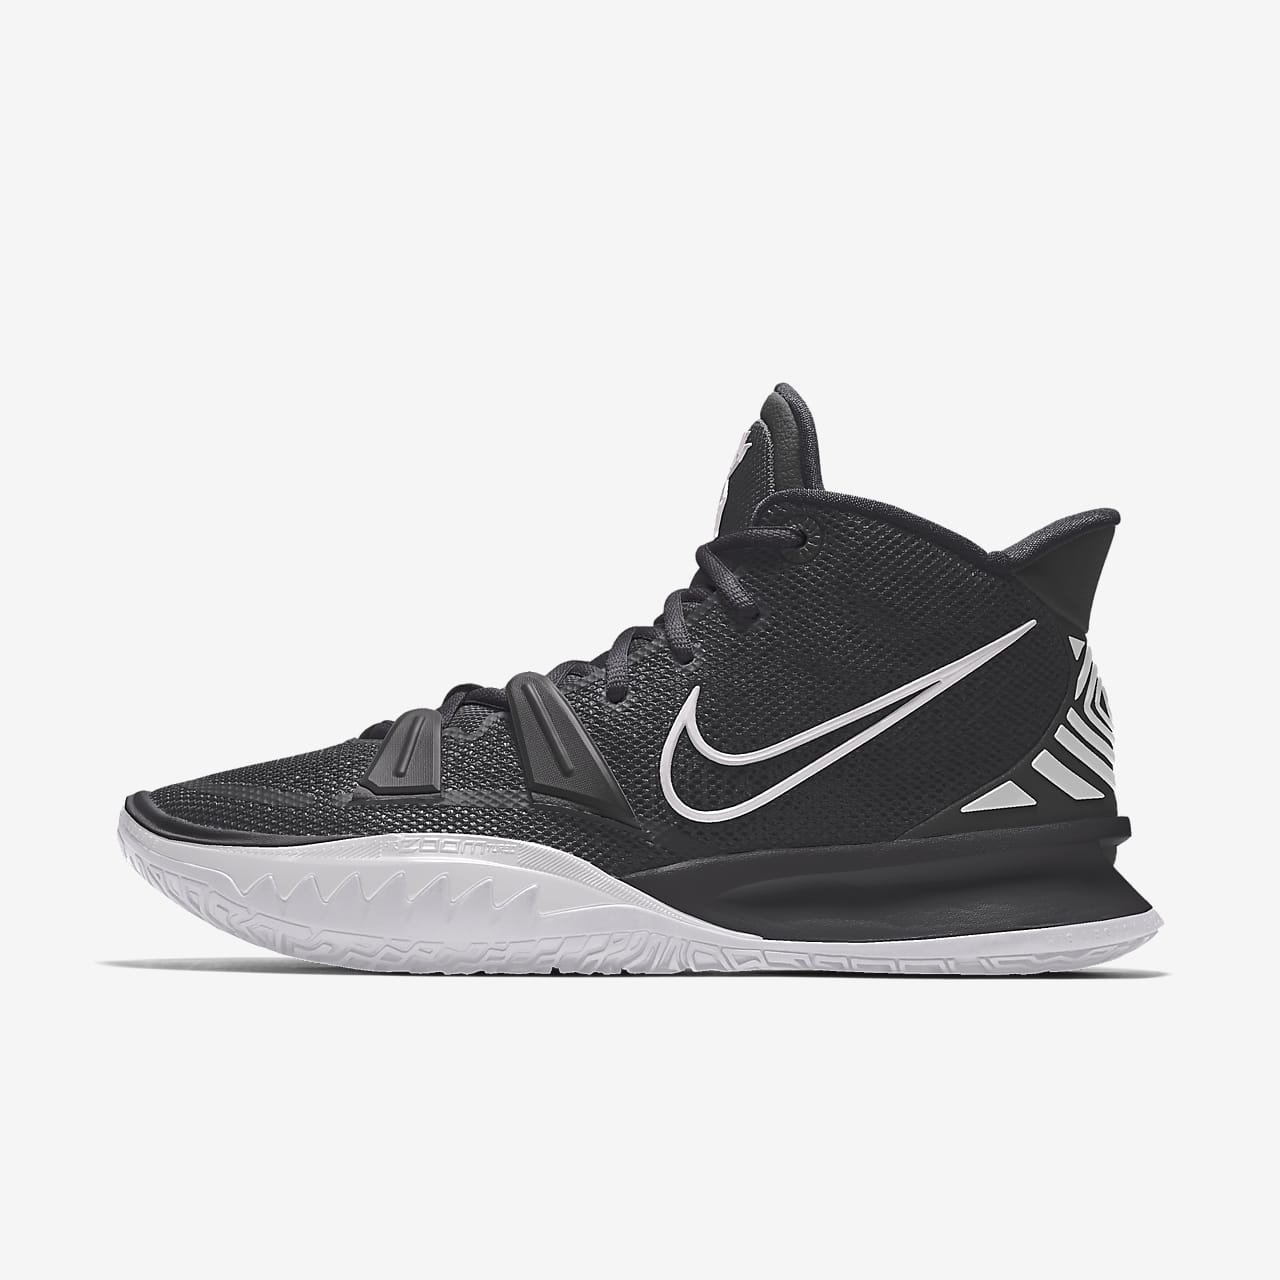 Kyrie 7 By You personalisierbarer Basketballschuh